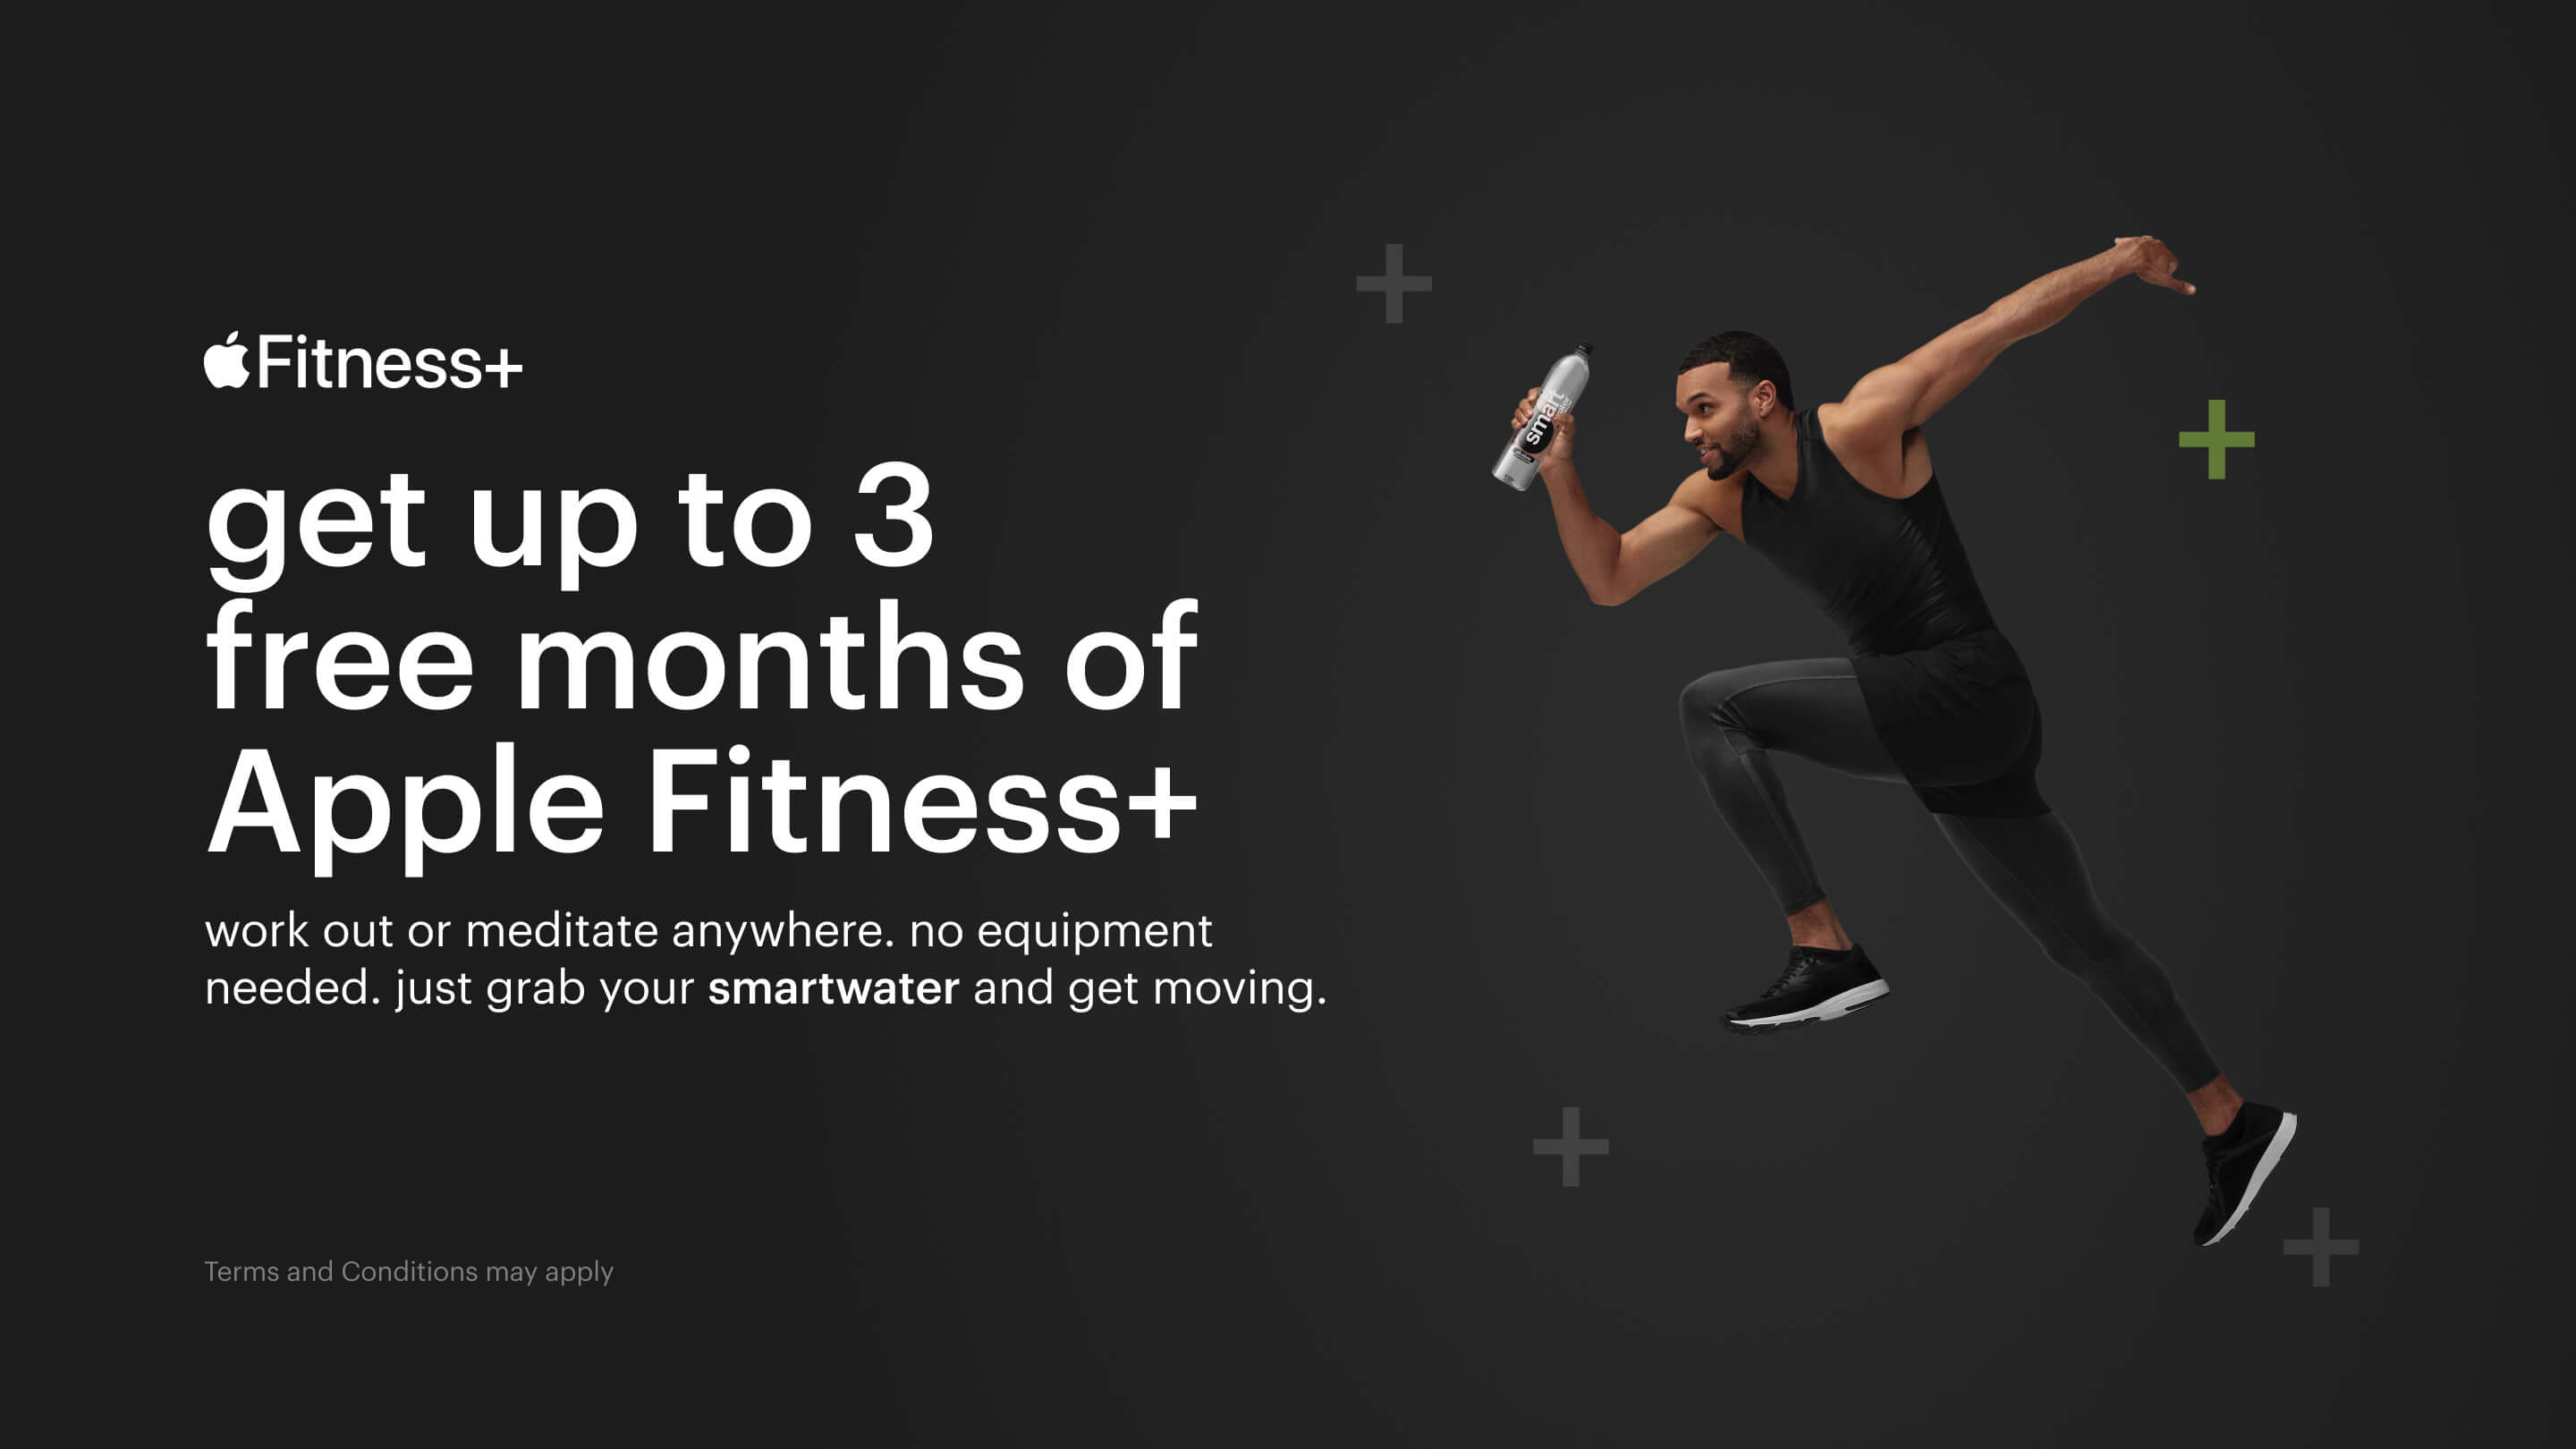 work you anywhere, just grab your smartwater and go! get up to three months of Apple Fitness+